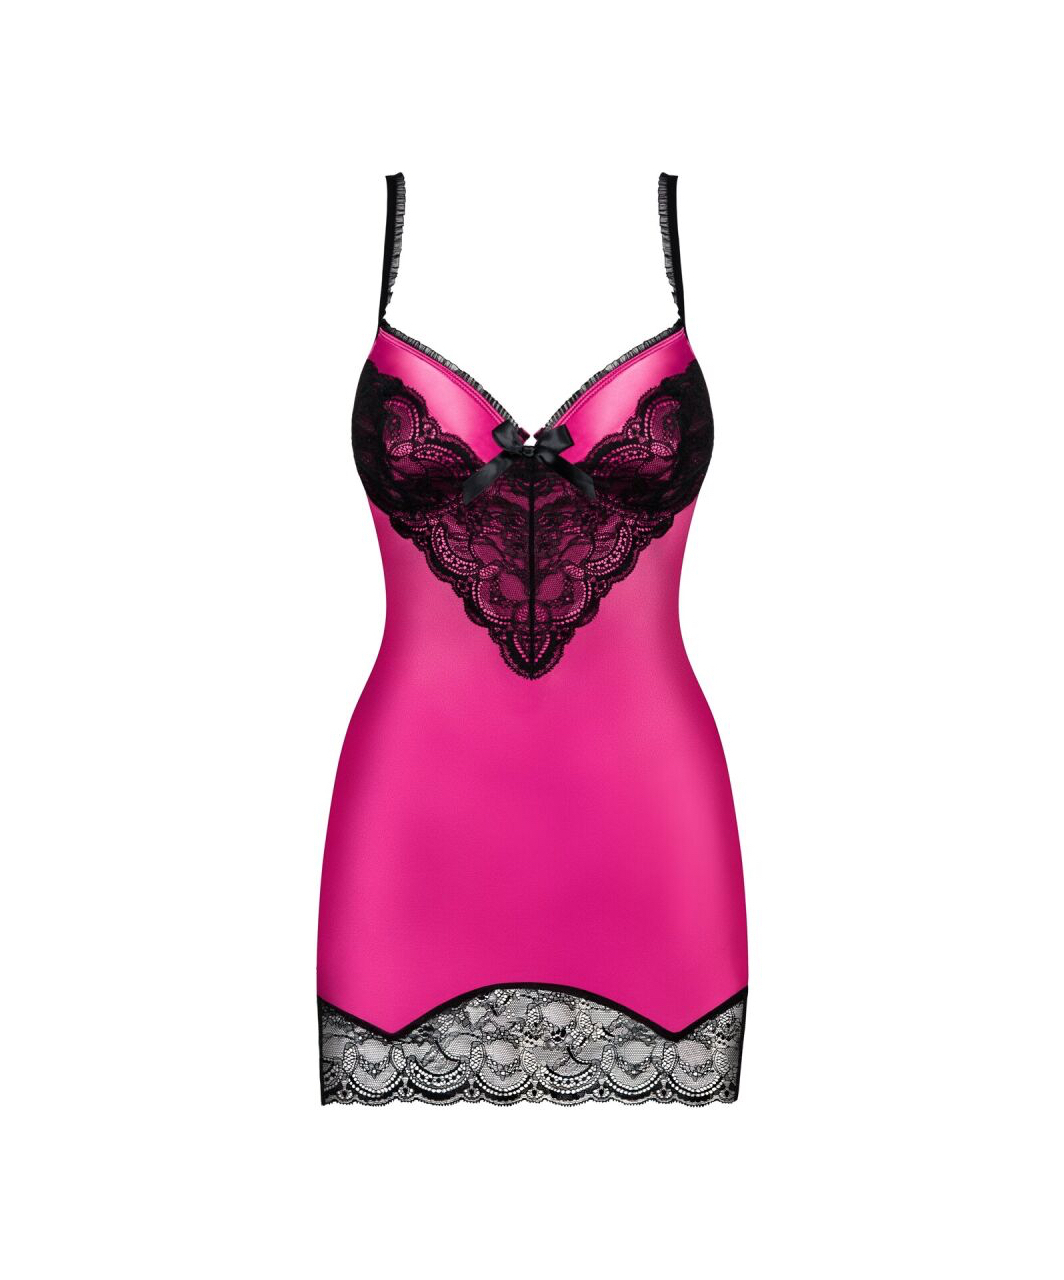 Obsessive pink satin chemise with black lace